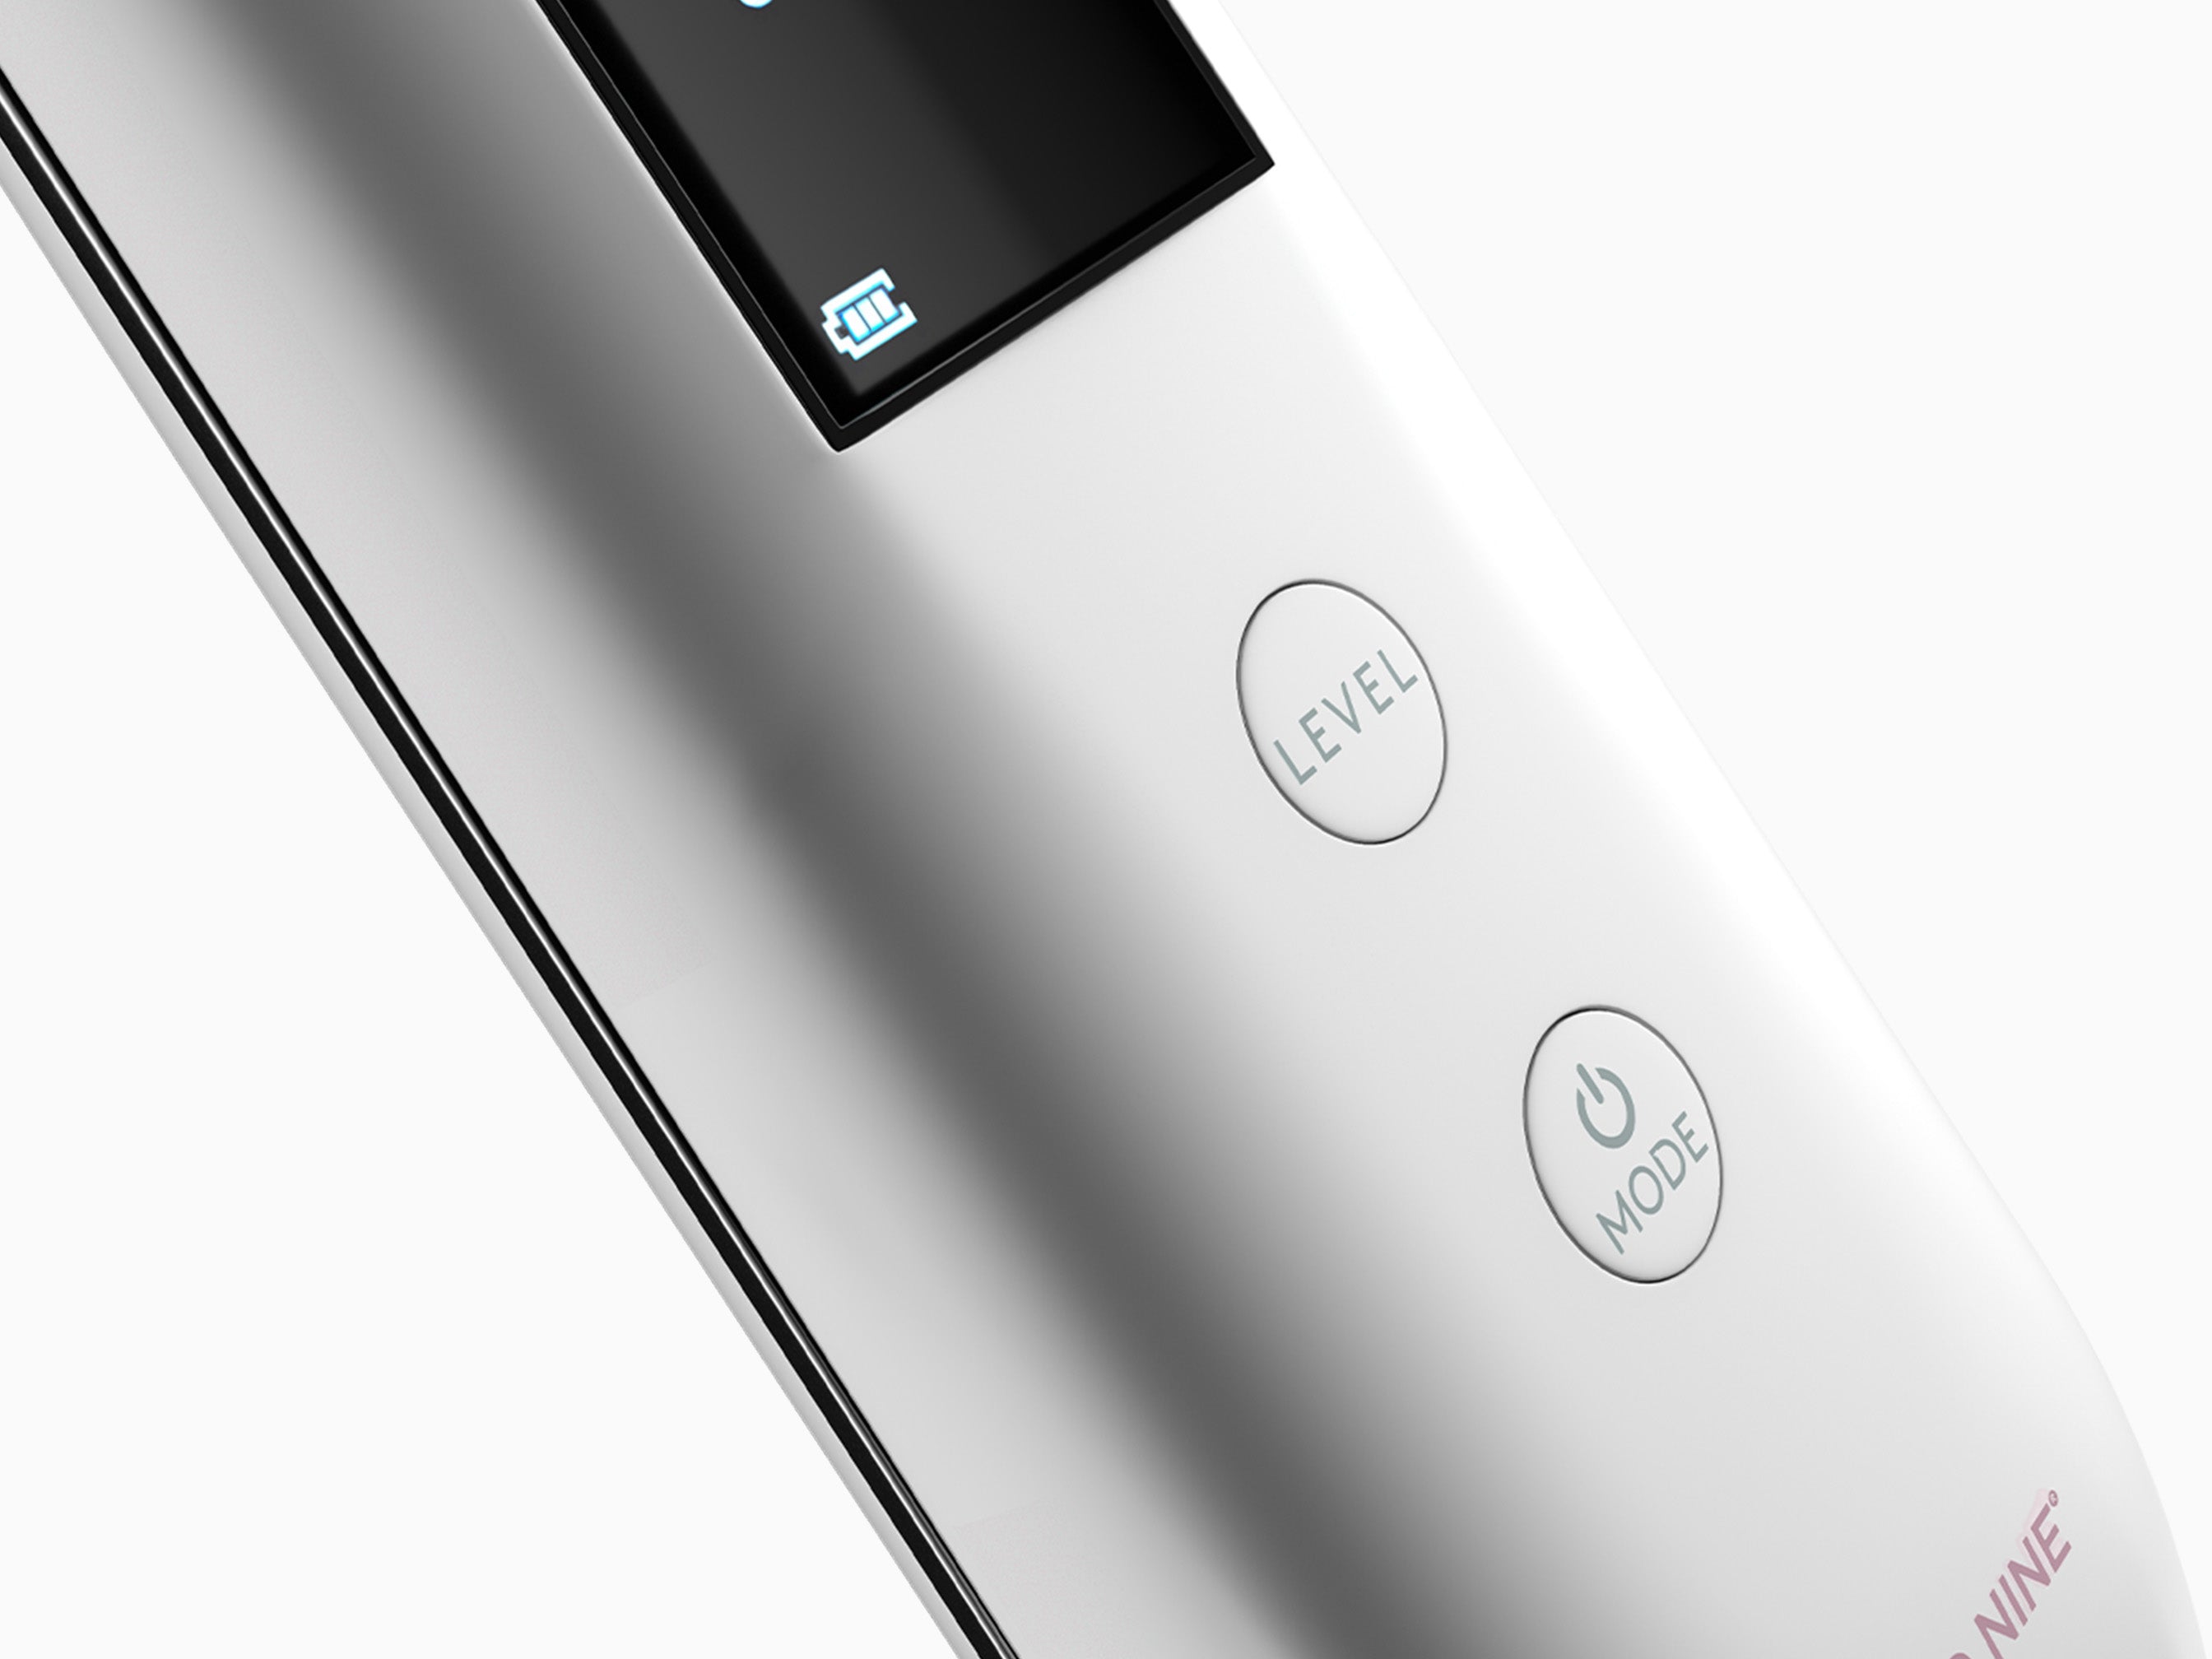 A close-up image of the back of The Rejuvenate showcasing the power and level buttons to activate the beauty device.